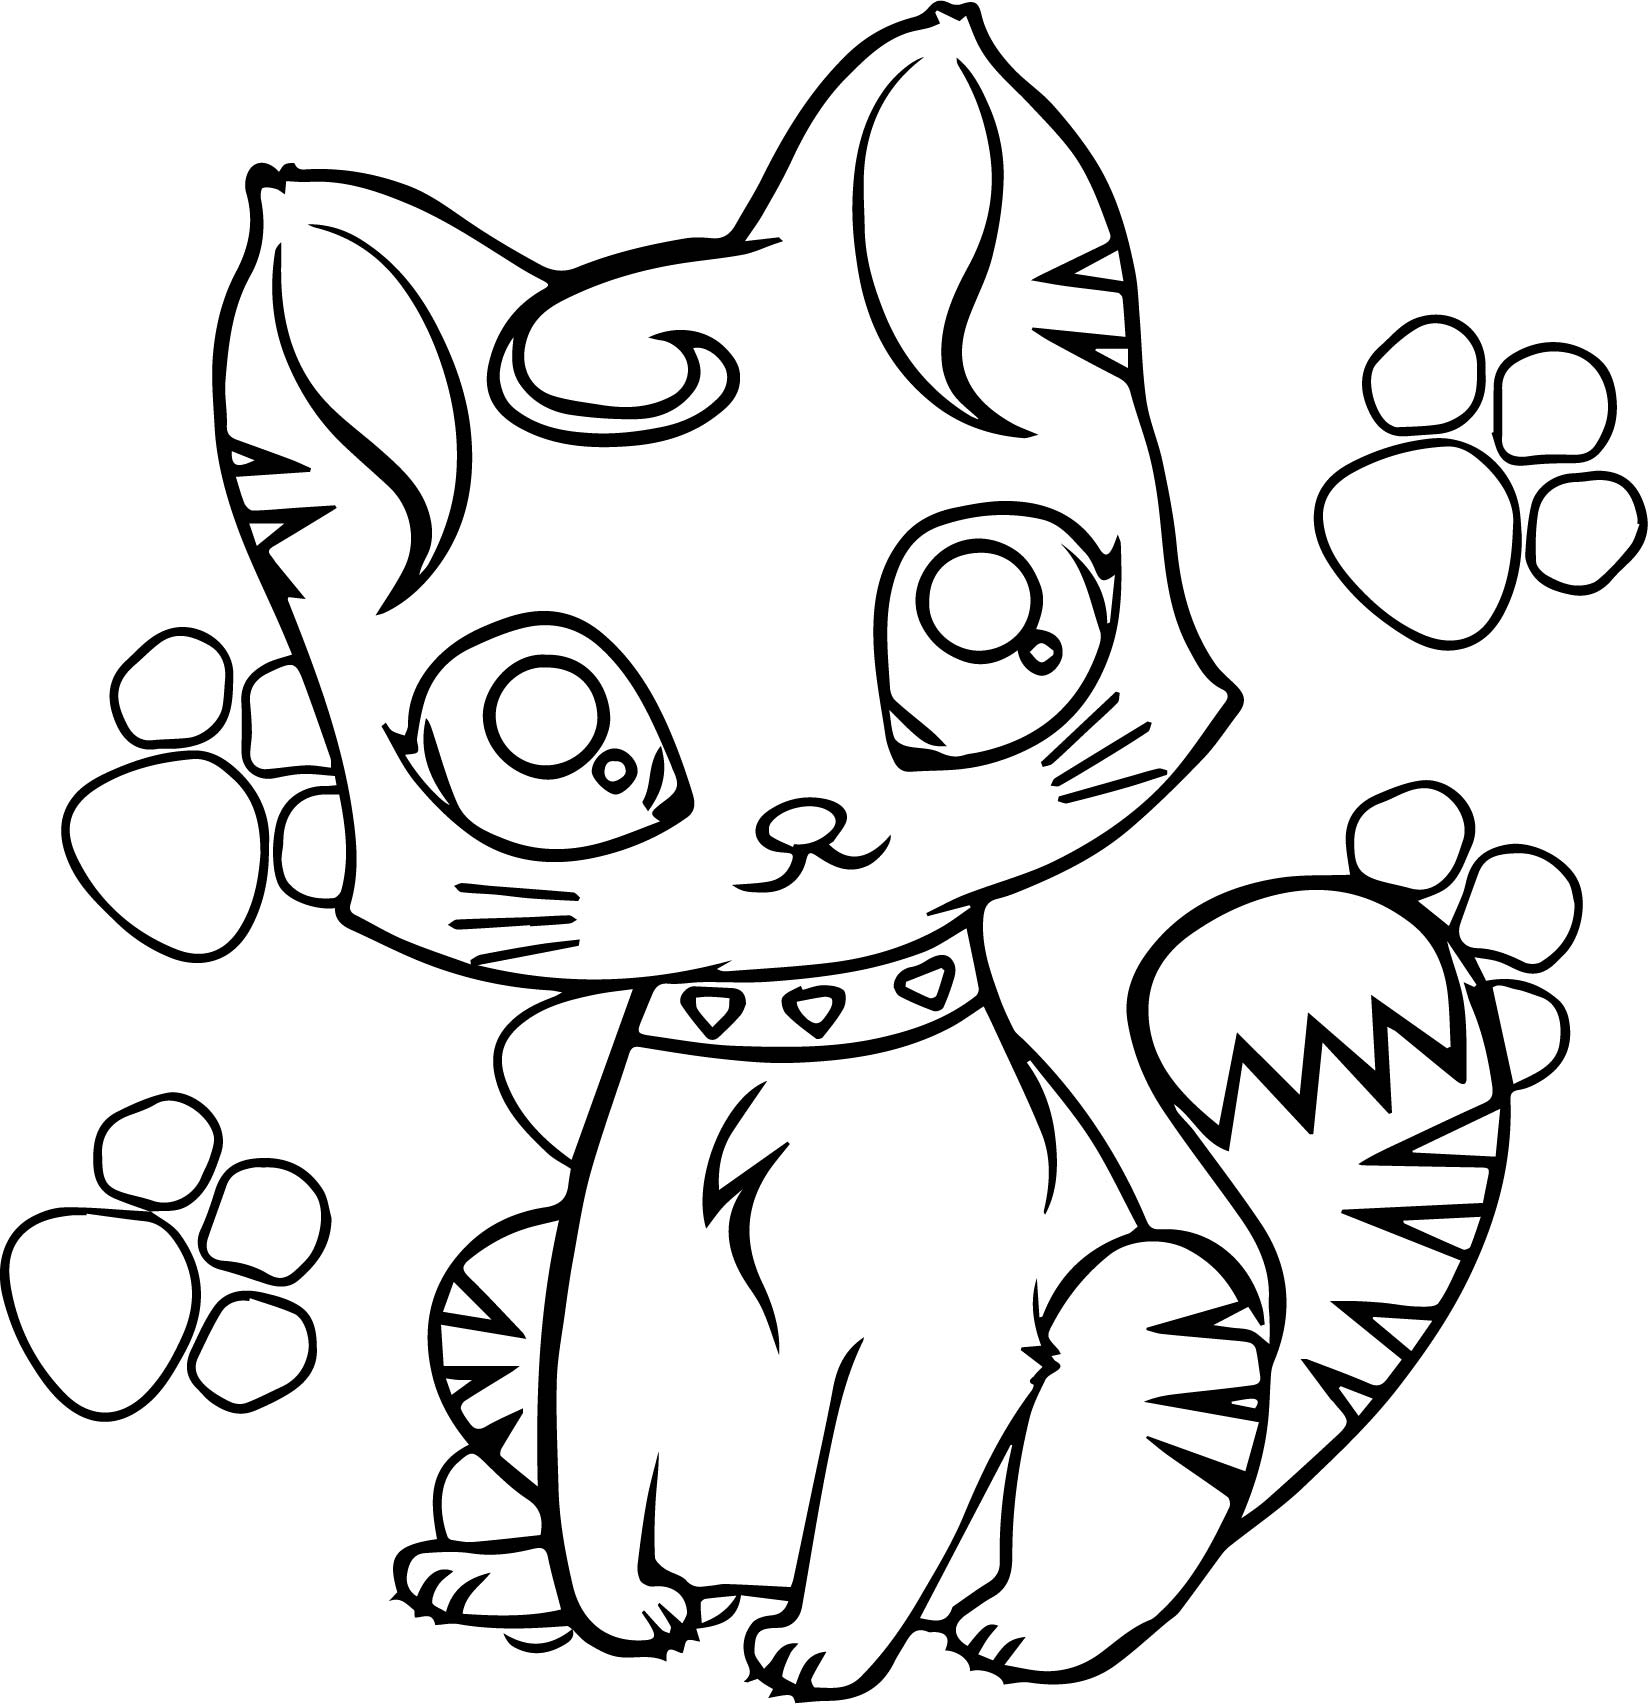 Beautiful Girl Cat And Cat Footprint Coloring Page - Wecoloringpage.com